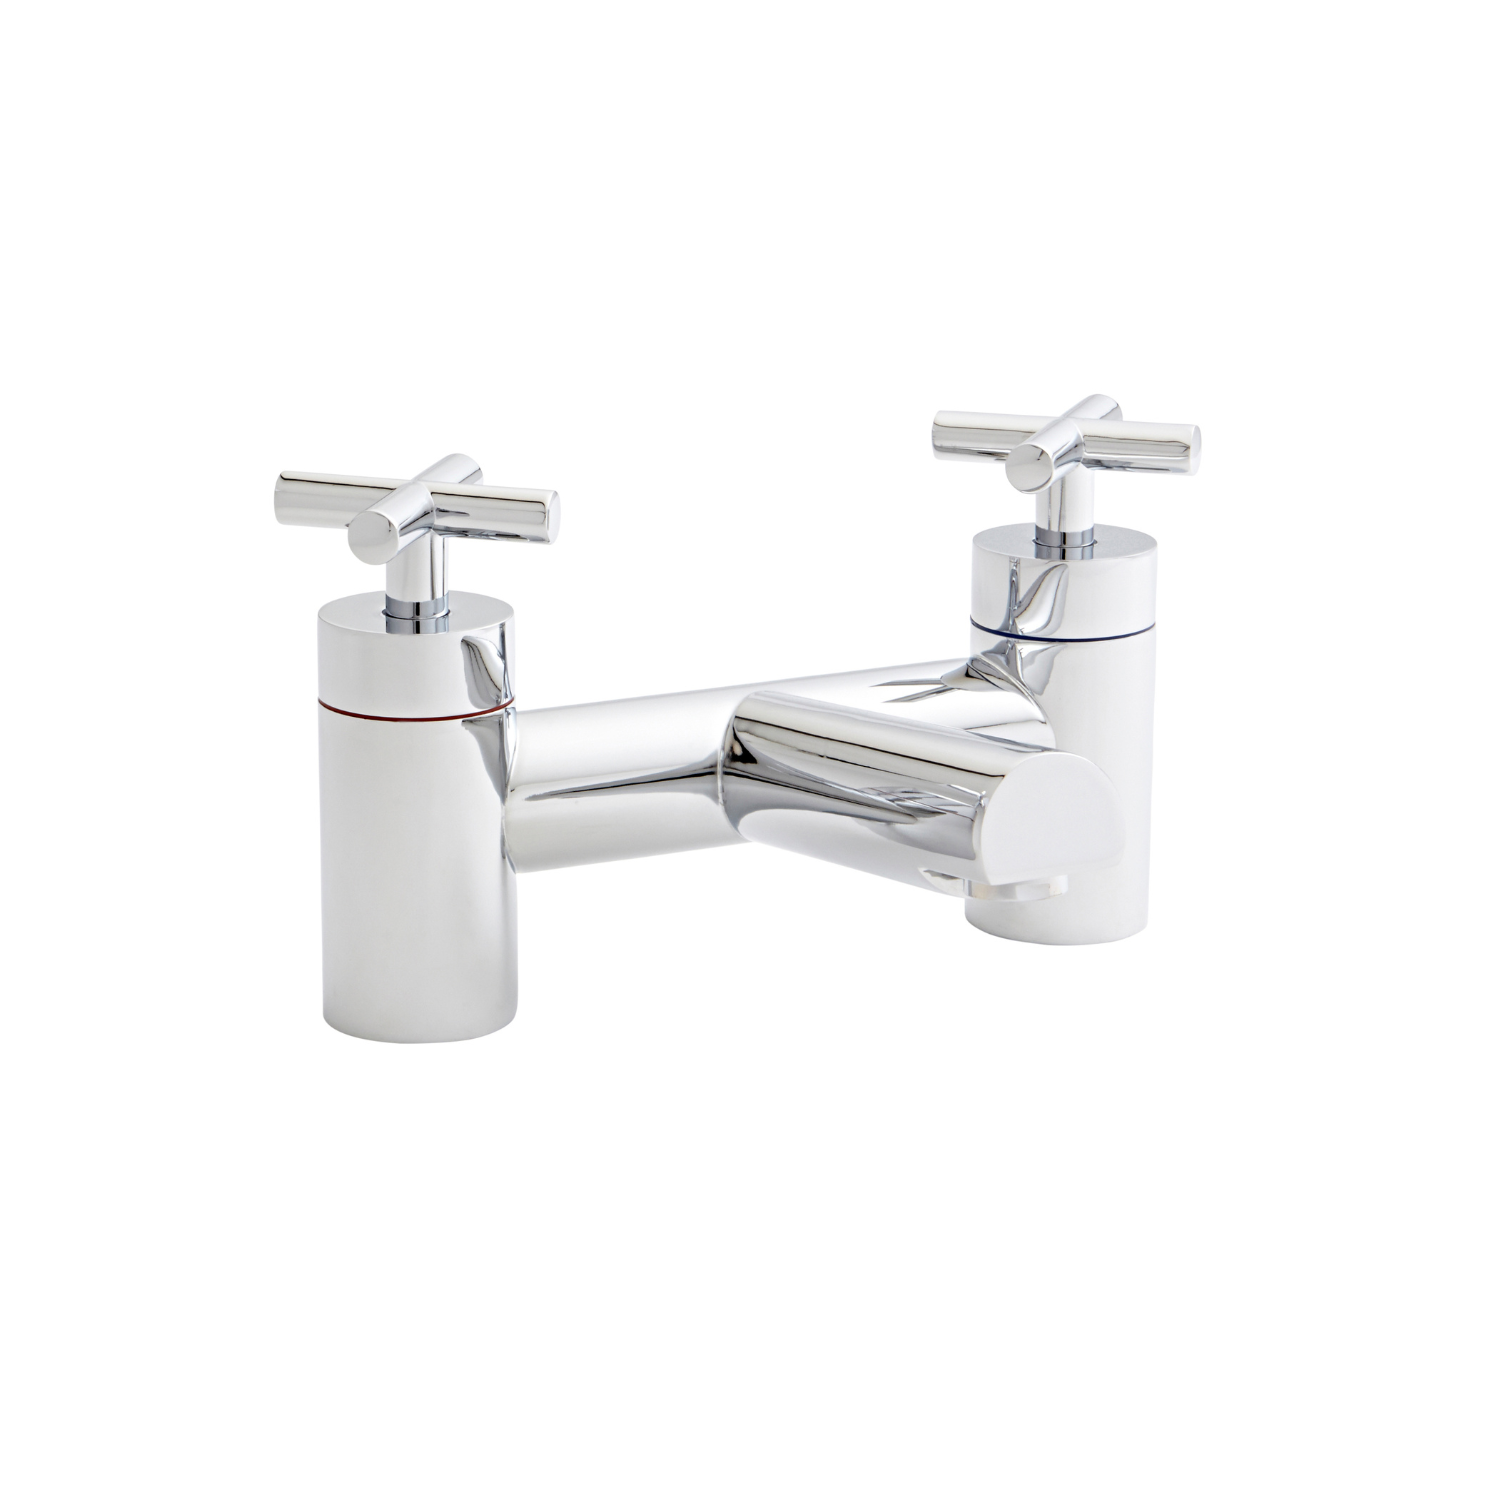 Kartell UK Times Times Bath Filler, Mono Basin Mixer with Click Waste Set